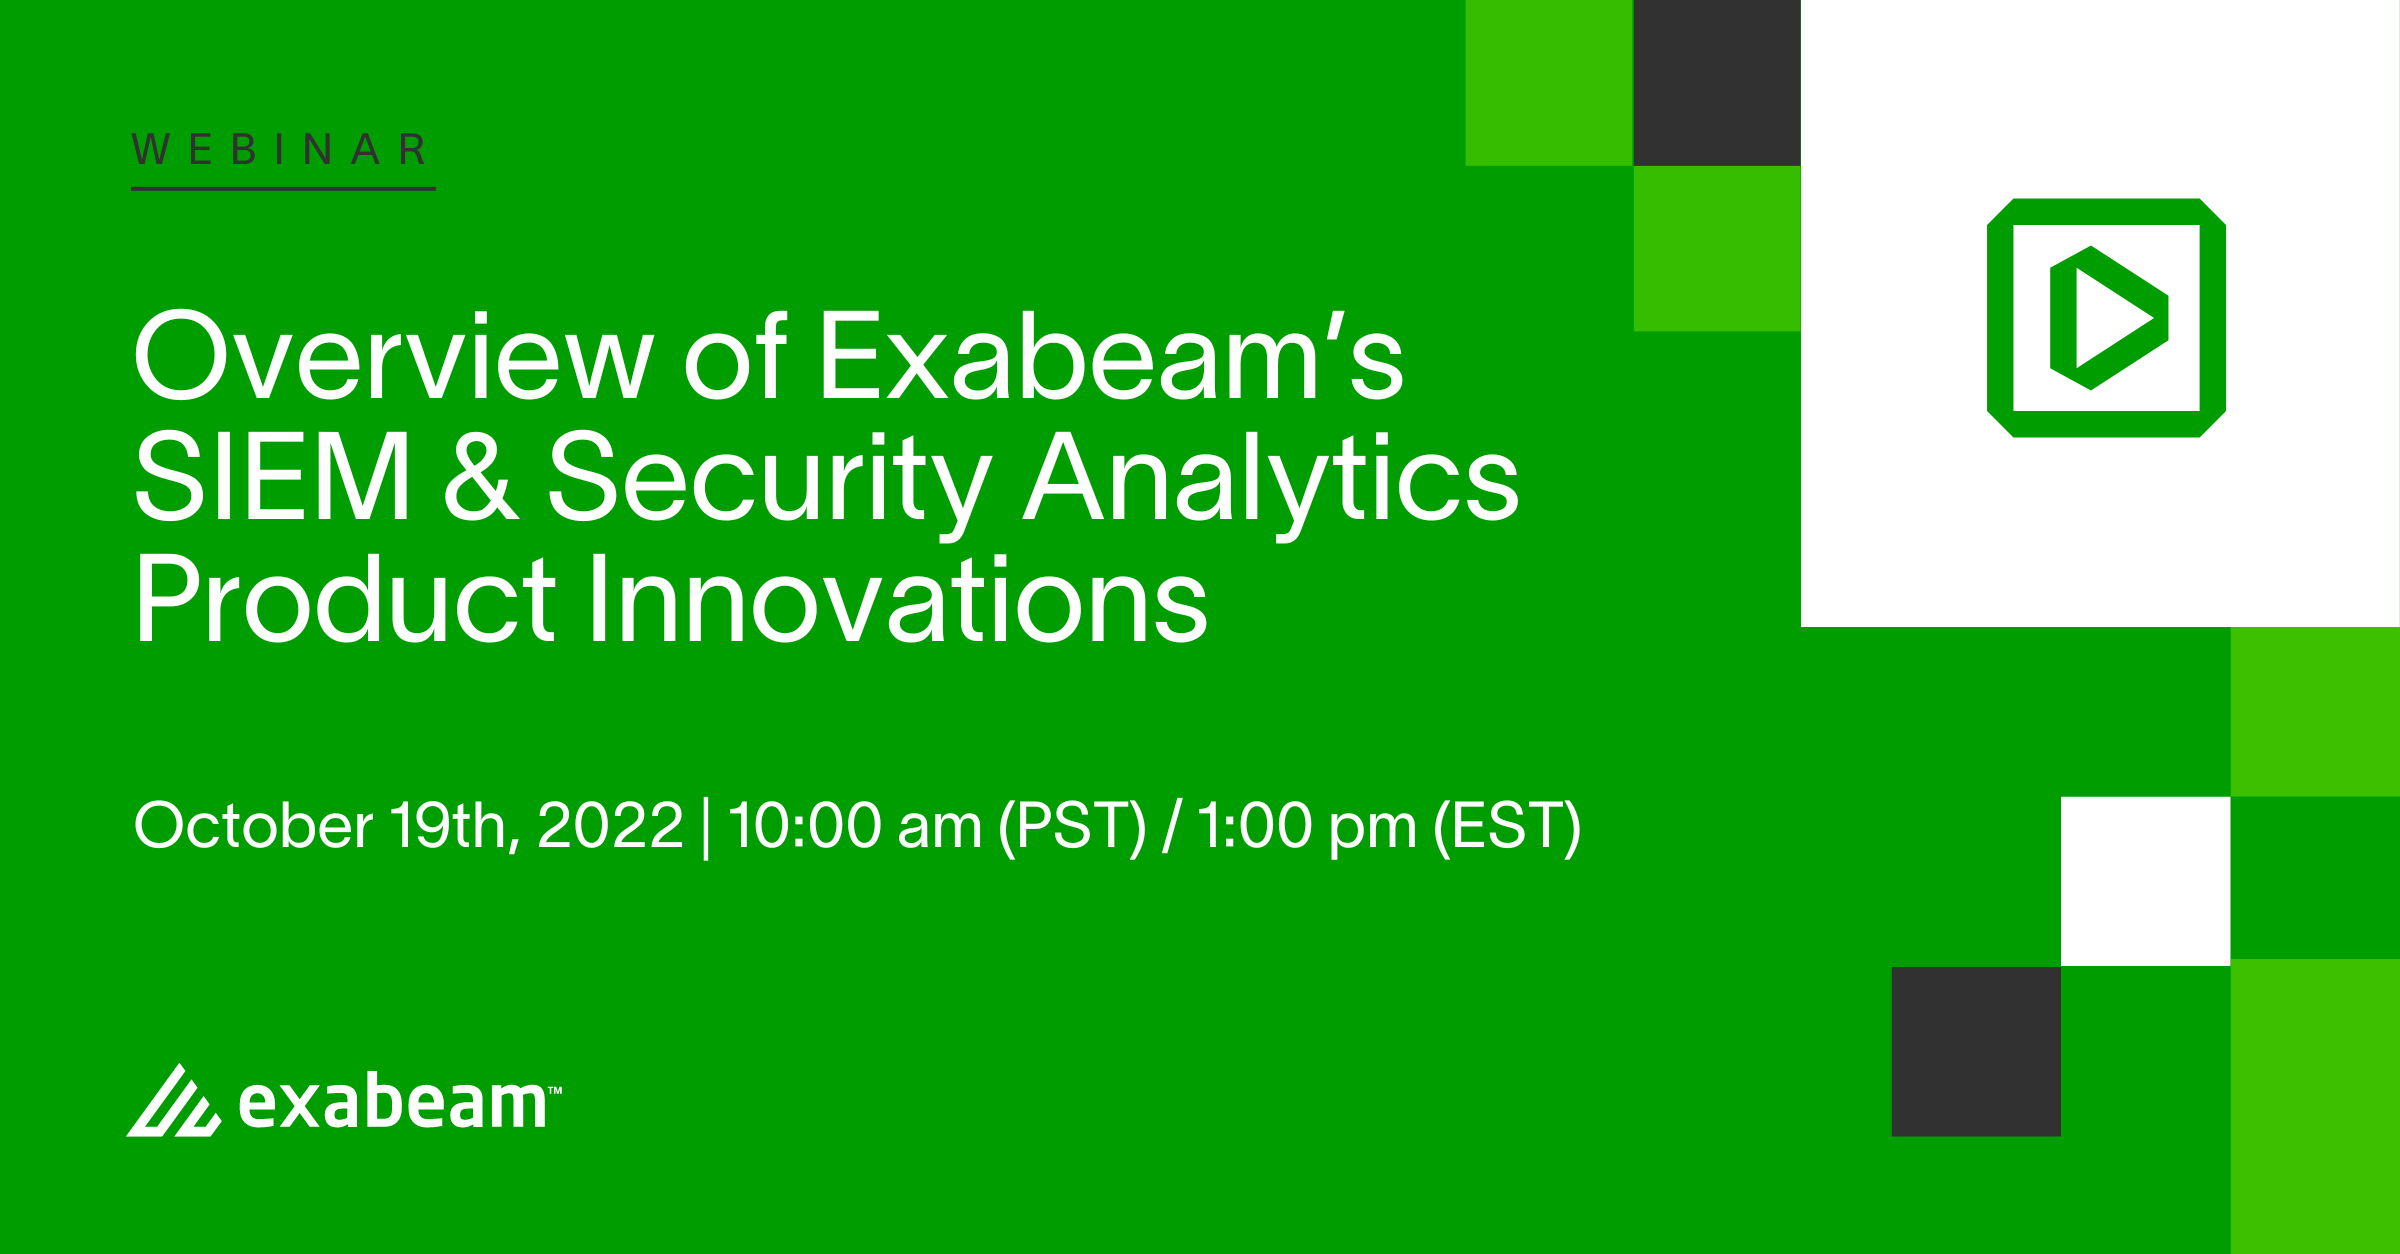 Overview of Exabeam's SIEM & Security Analytics Product Innovations